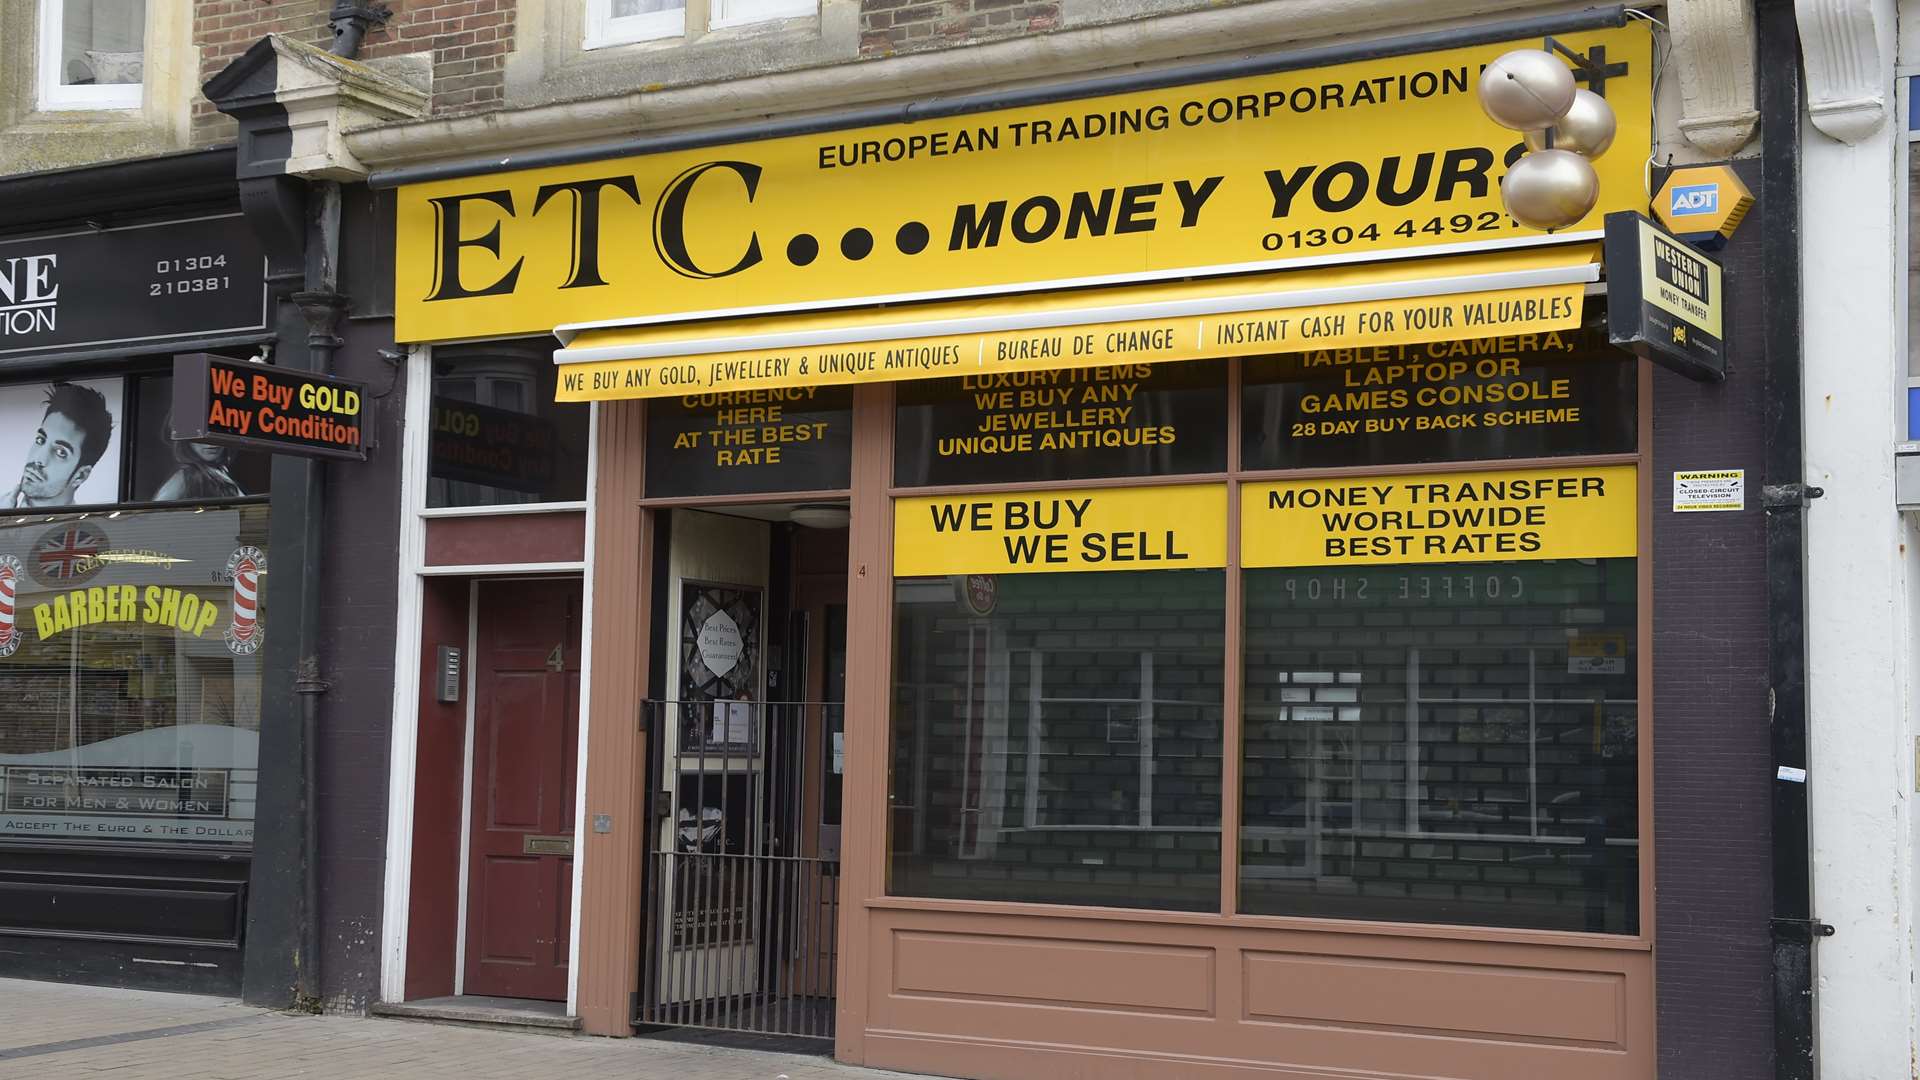 The ETC pawn shop in Dover